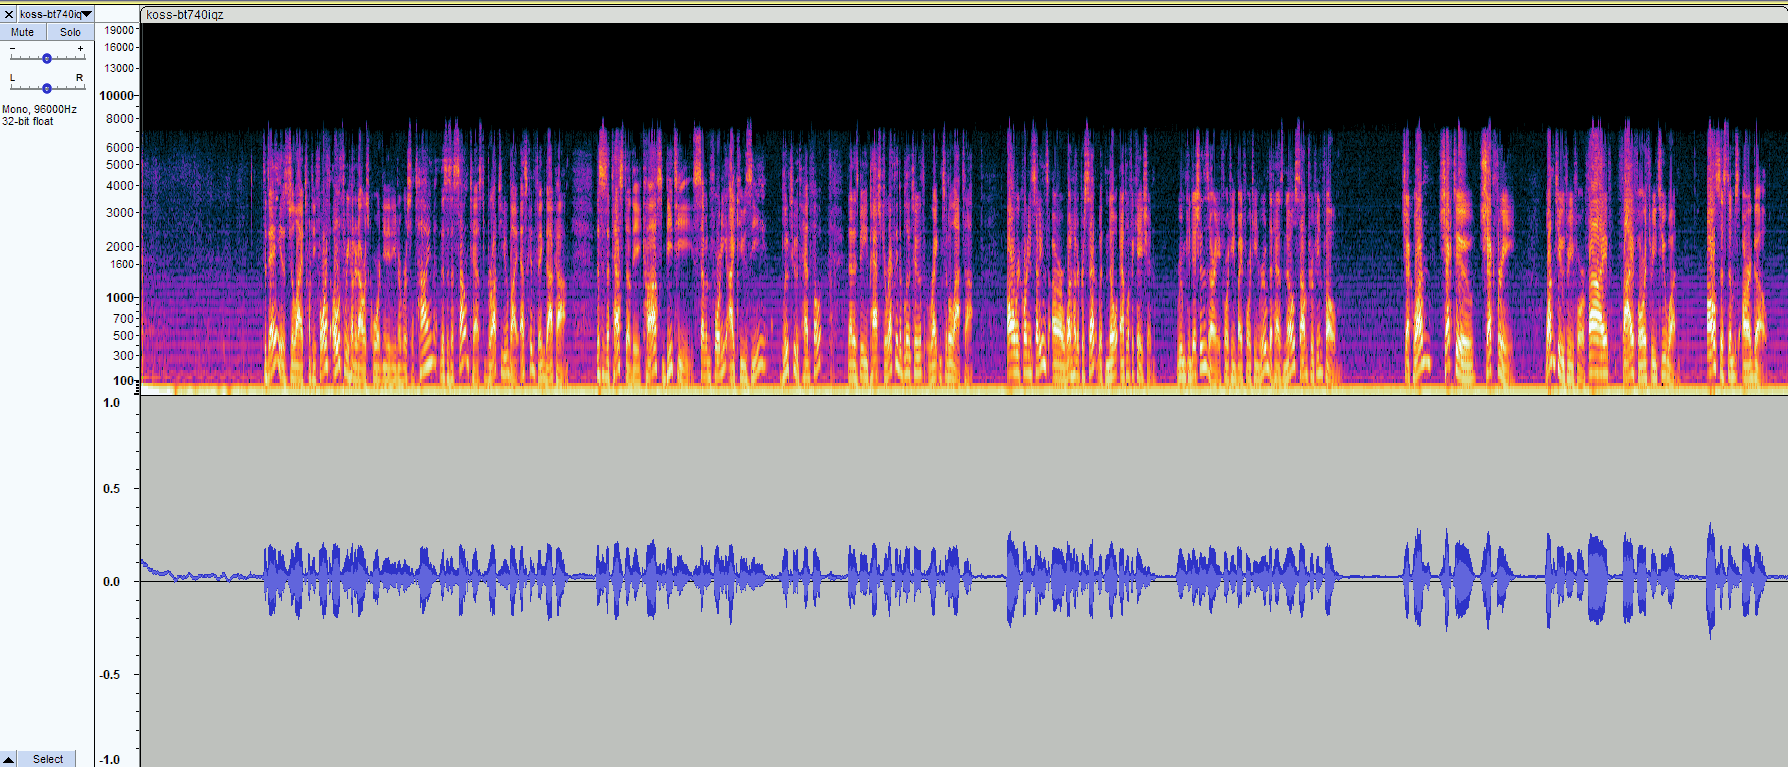 Audacity preview of the microphone in the Koss bt740iqz